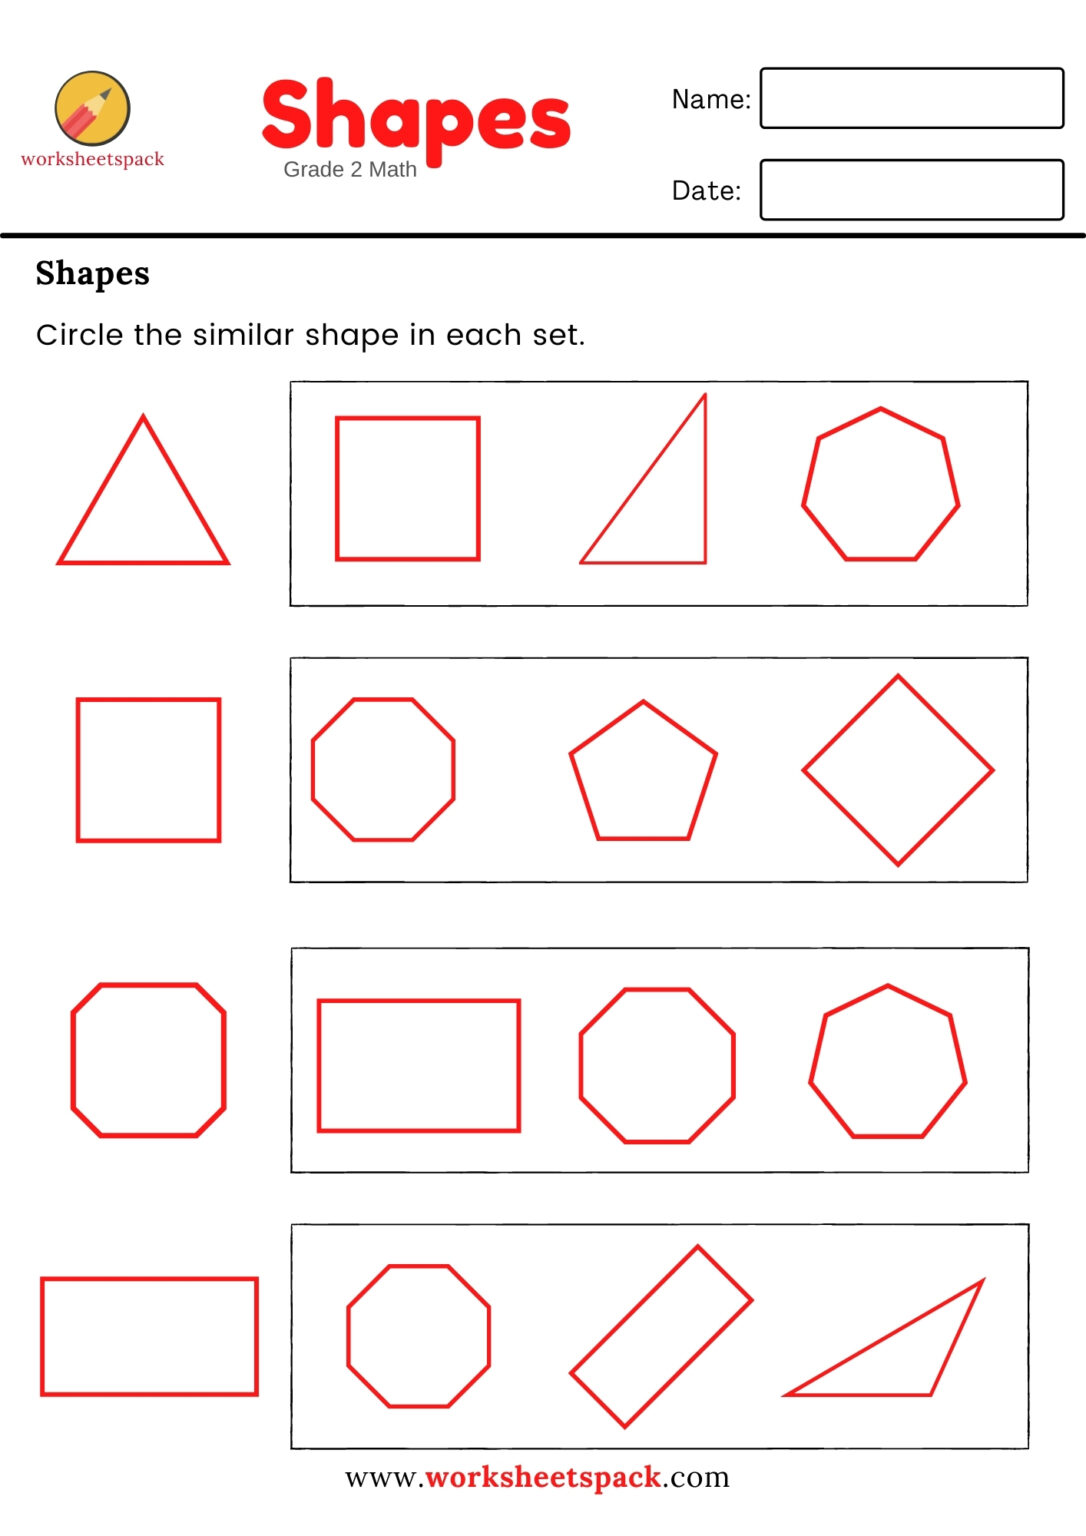 2nd grade math worksheets shapes and vertices